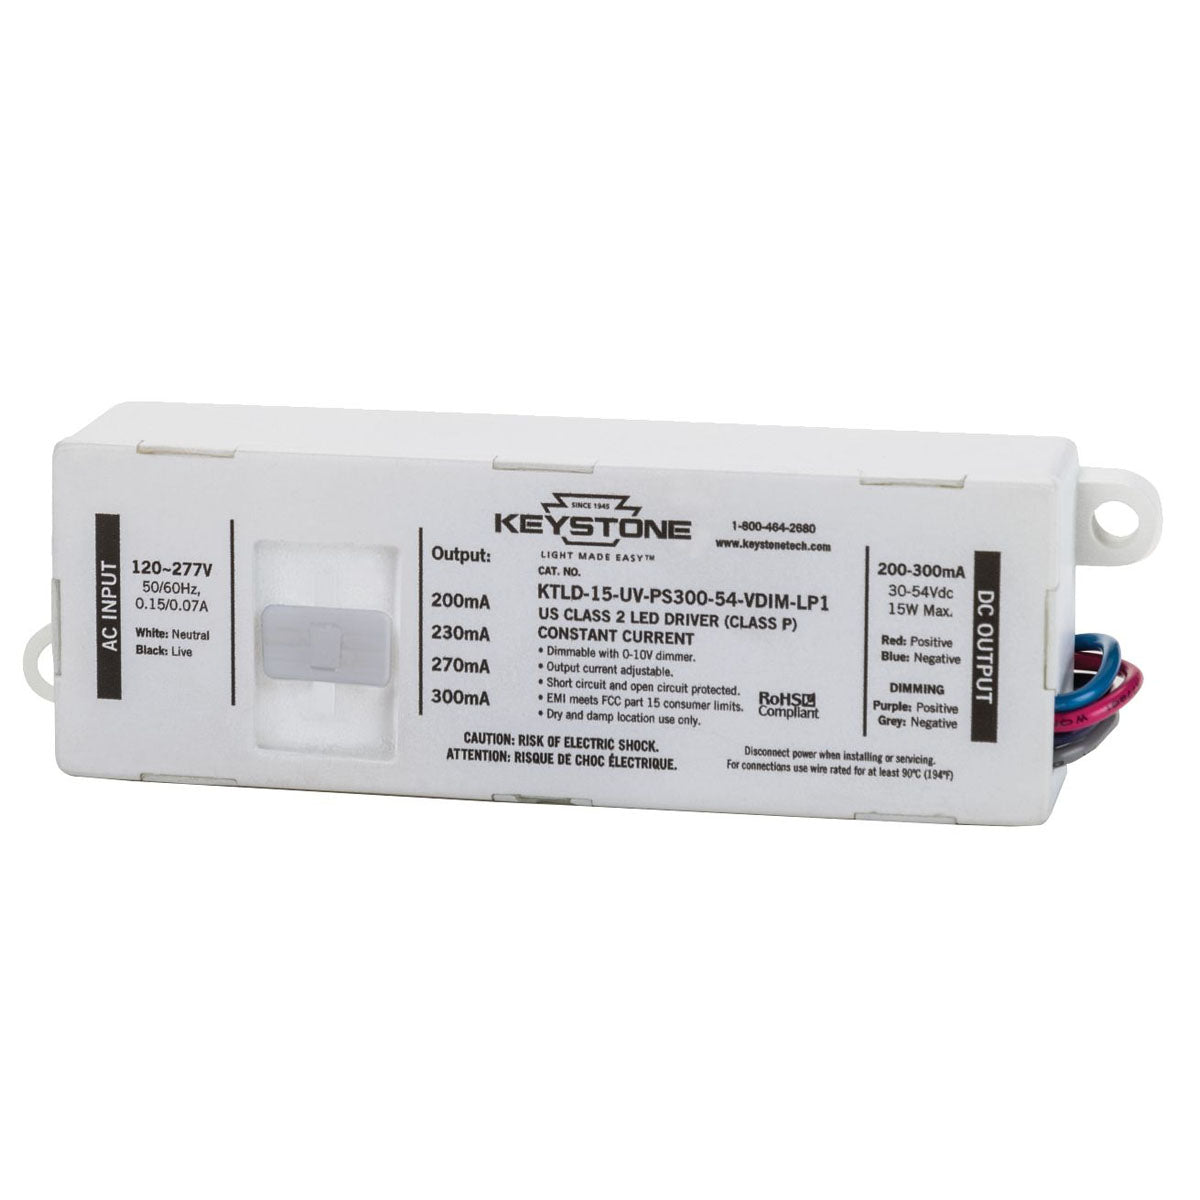 Power Select LED Driver, 15W, Adjustable Constant Current 200-300mA, 0-10V Dimming, 120-277V Input